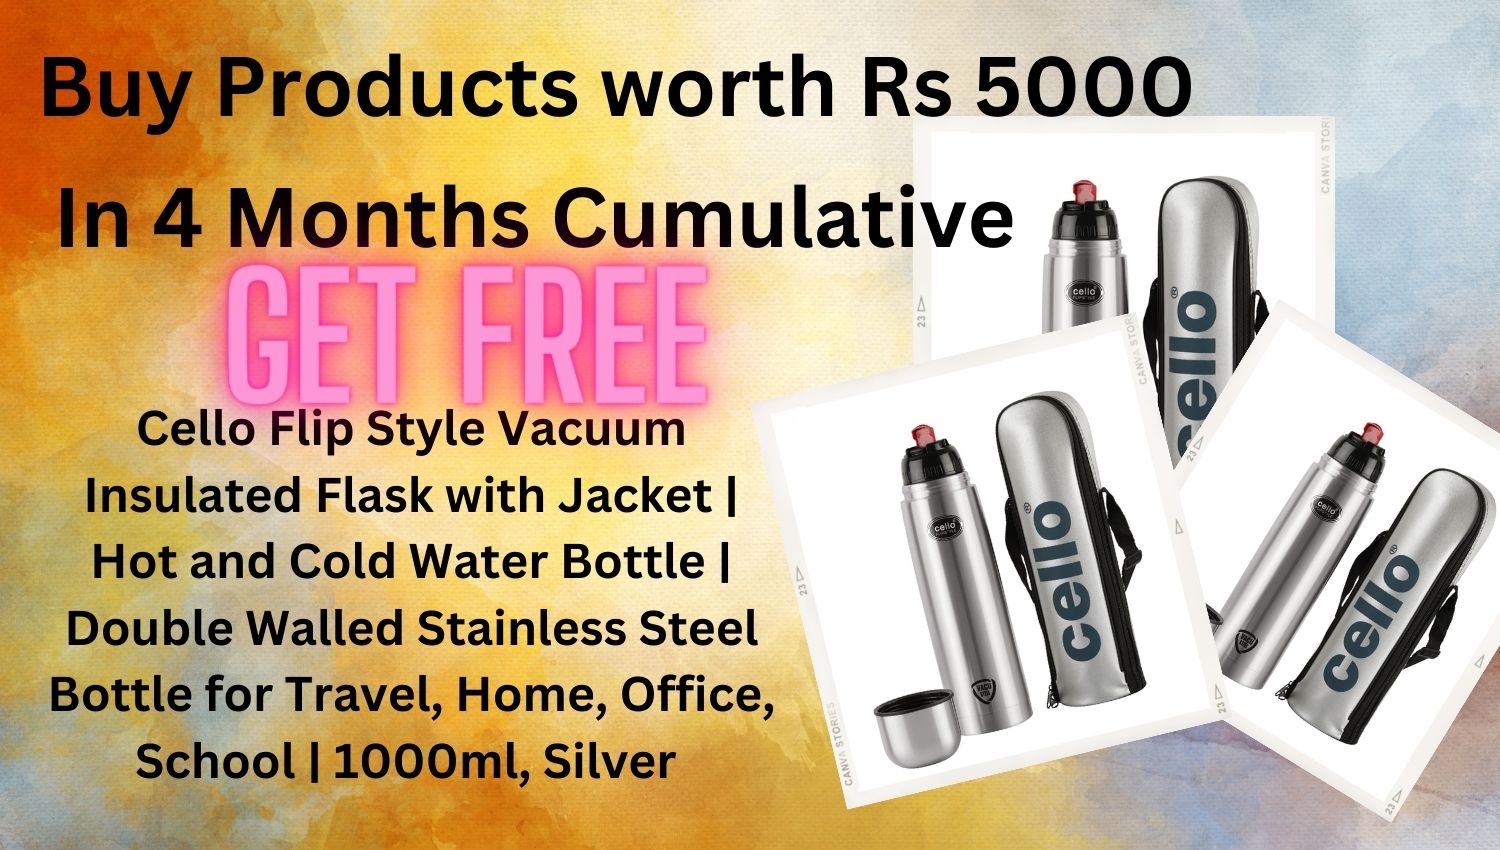 Cello Flip Style Vacuum Insulated Flask with Jacket Hot and Cold Water Bottle Double Walled Stainless Steel Bottle for Travel, Home, Office, School 1000ml, Silver